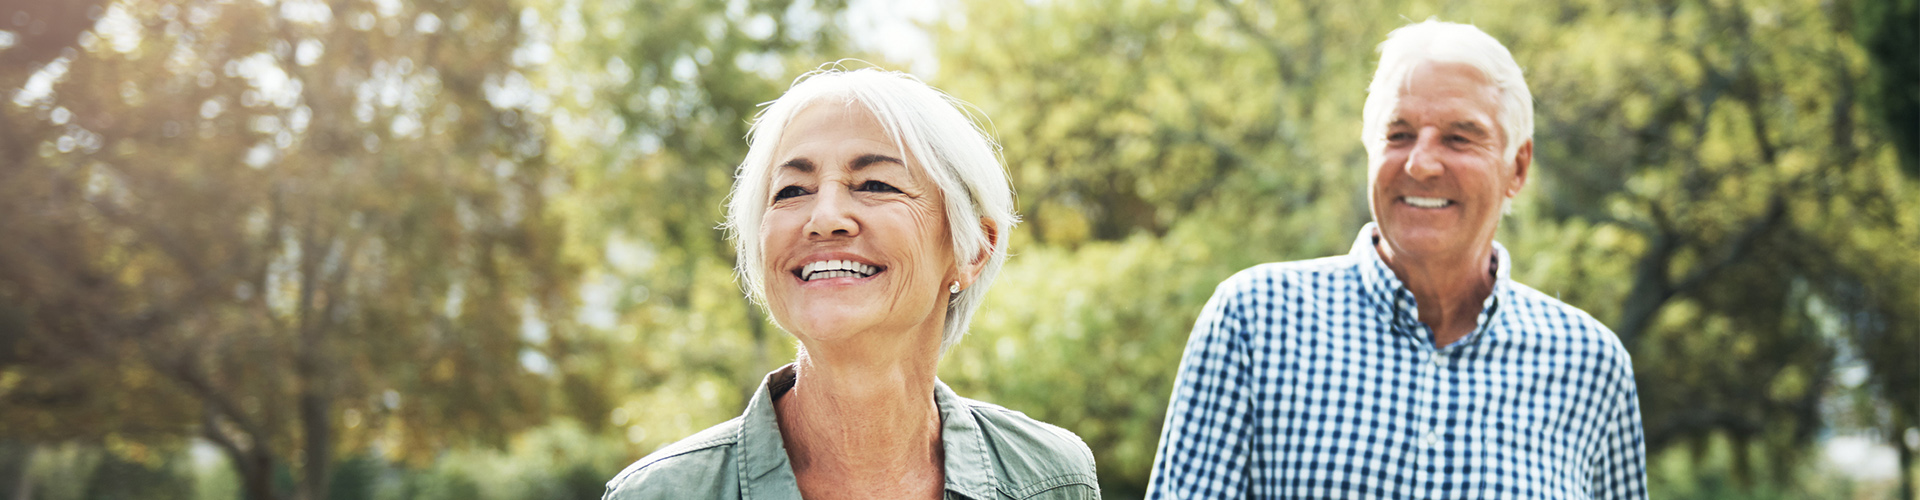 Aged Care and Retirement Banner for Insight (1900 x 500)